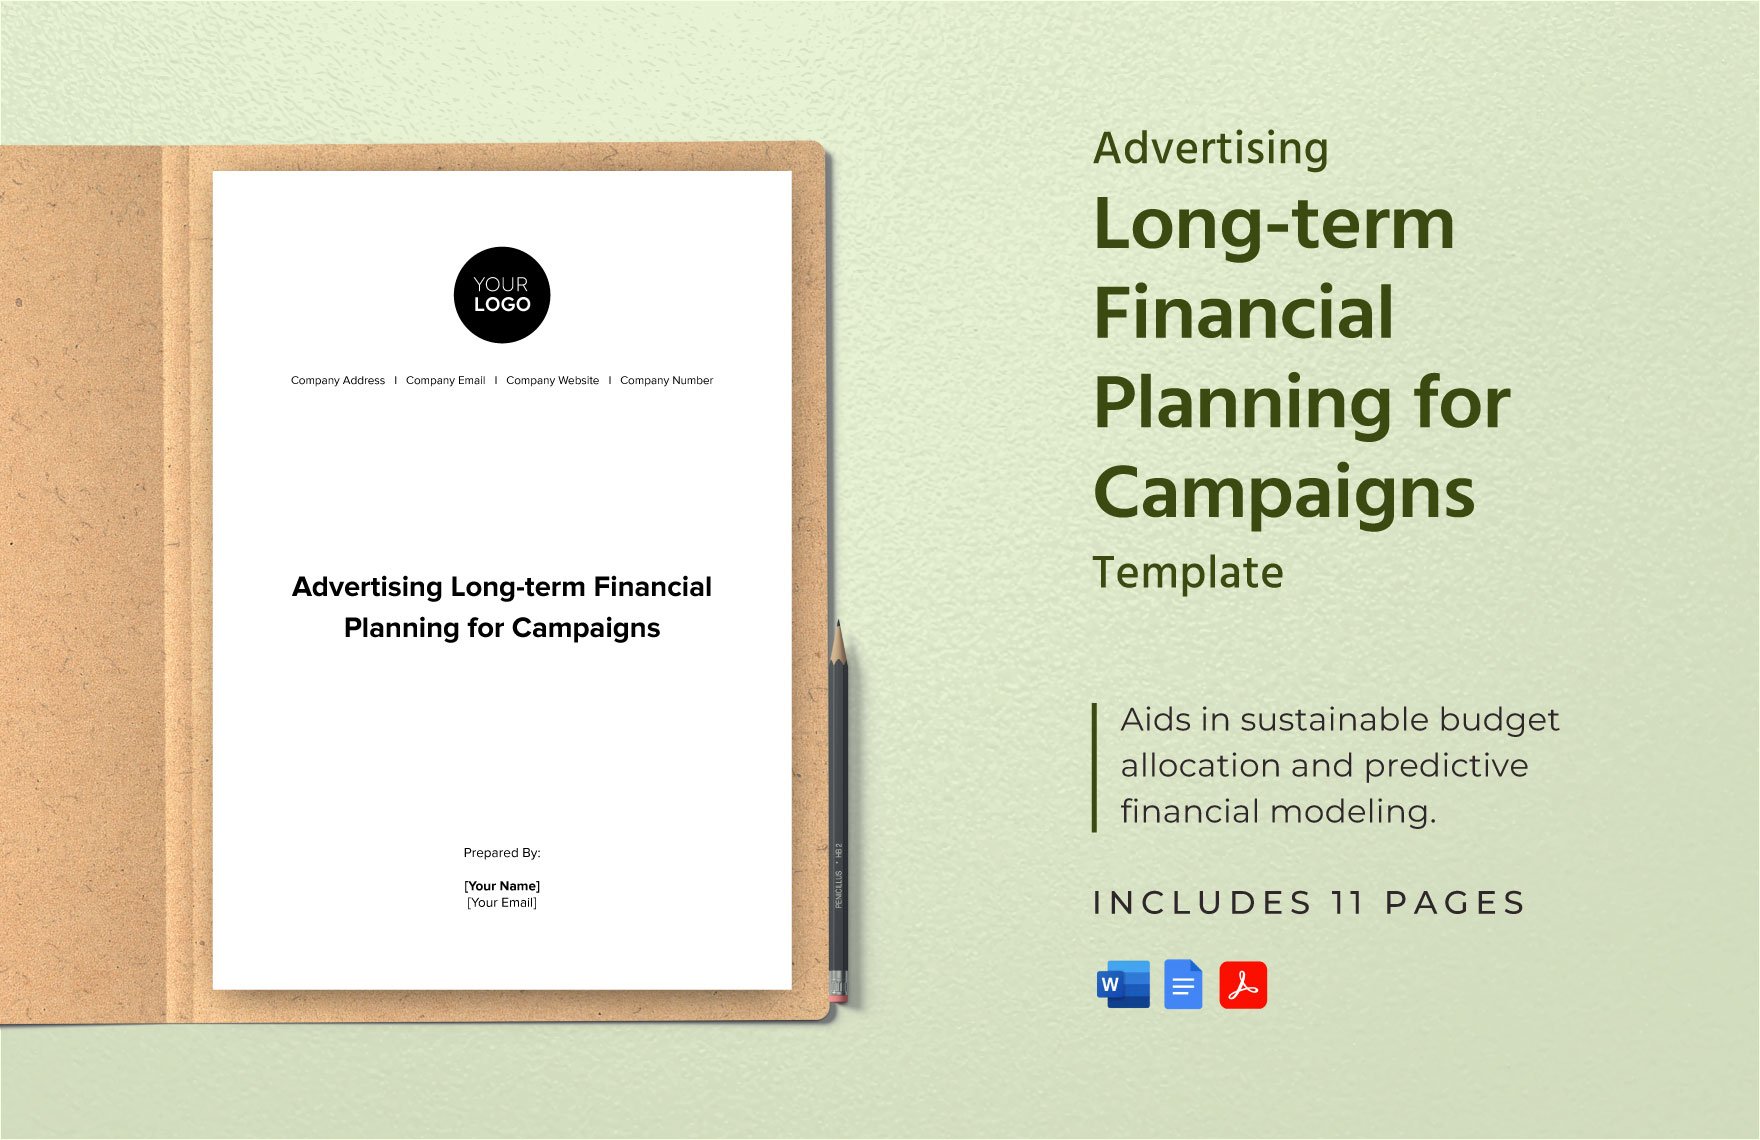 Advertising Long-term Financial Planning for Campaigns Template